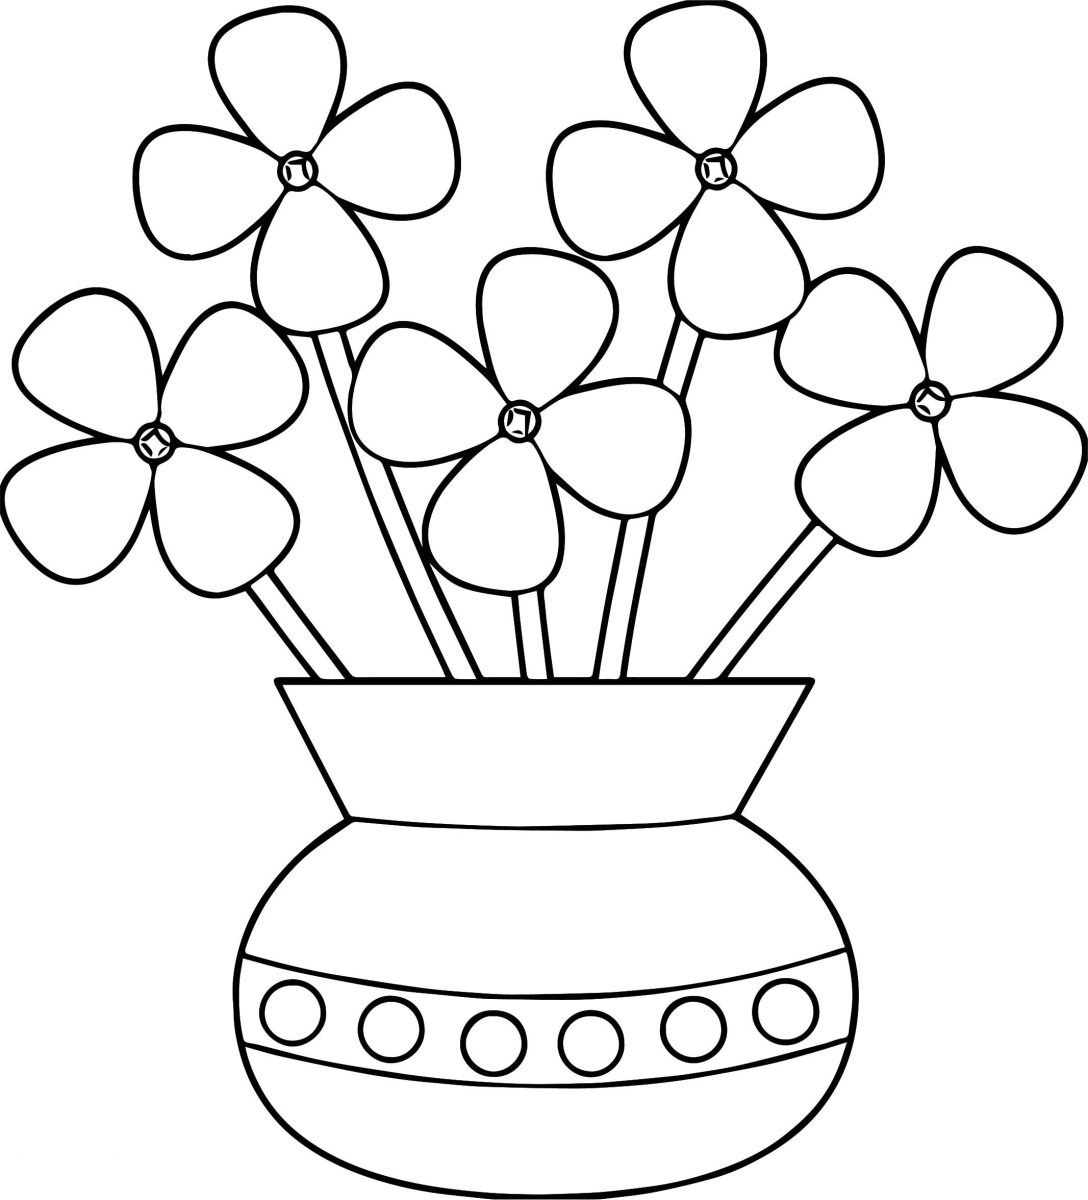 flower-pot-coloring-pages-best-coloring-pages-for-kids